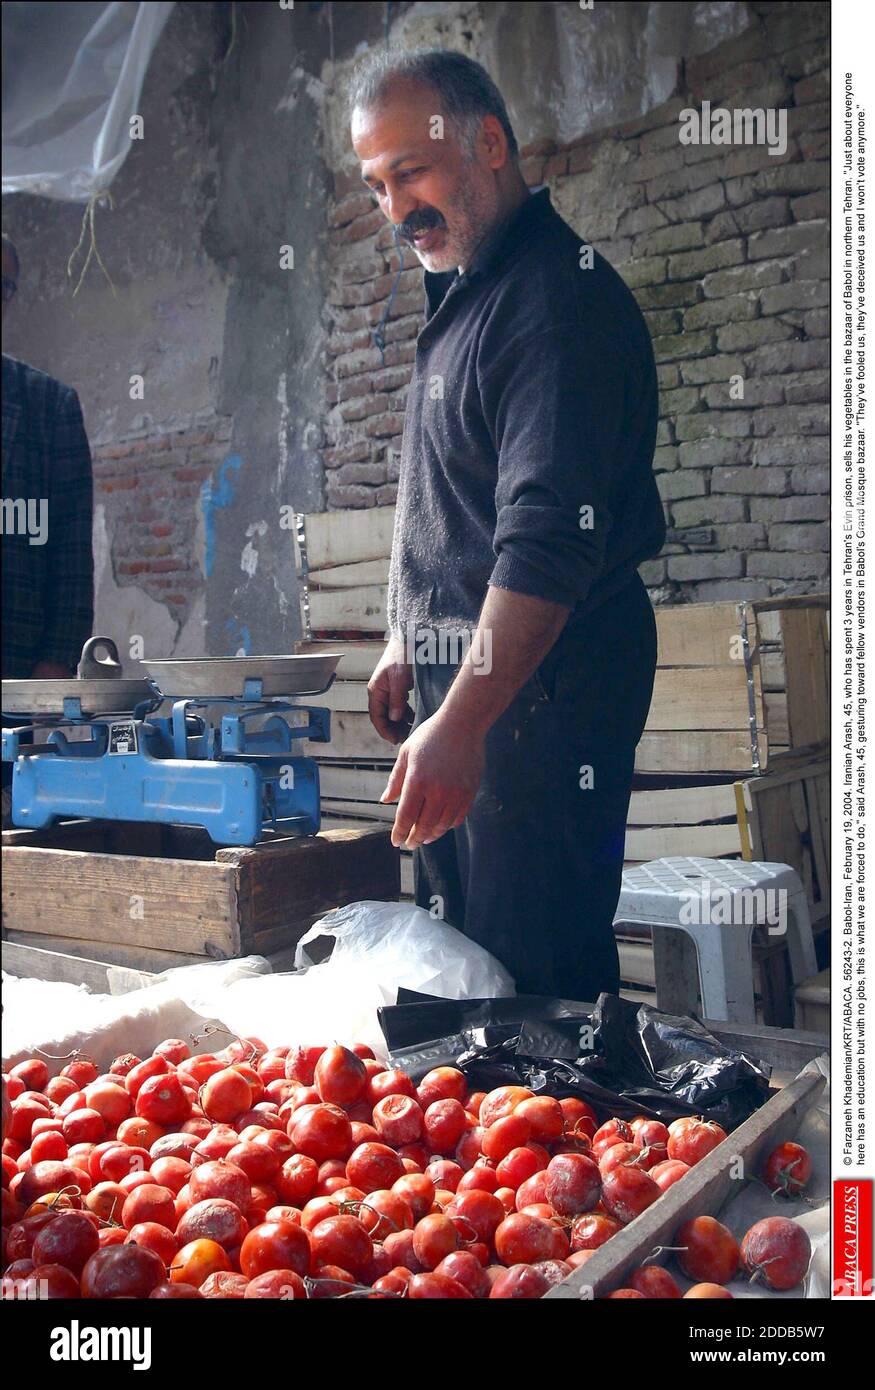 NO FILM, NO VIDEO, NO TV, NO DOCUMENTARY - © Farzaneh Khademian/KRT/ABACA. 56243-2. Babol-Iran, February 19, 2004. Iranian Arash, 45, who has spent 3 years in Tehran's Evin prison, sells his vegetables in the bazaar of Babol in northern Tehran. Just about everyone here has an education but with no jobs, this is what we are forced to do, said Arash, 45, gesturing toward fellow vendors in Babol's Grand Mosque bazaar. They've fooled us, they've deceived us and I won't vote anymore. Stock Photo